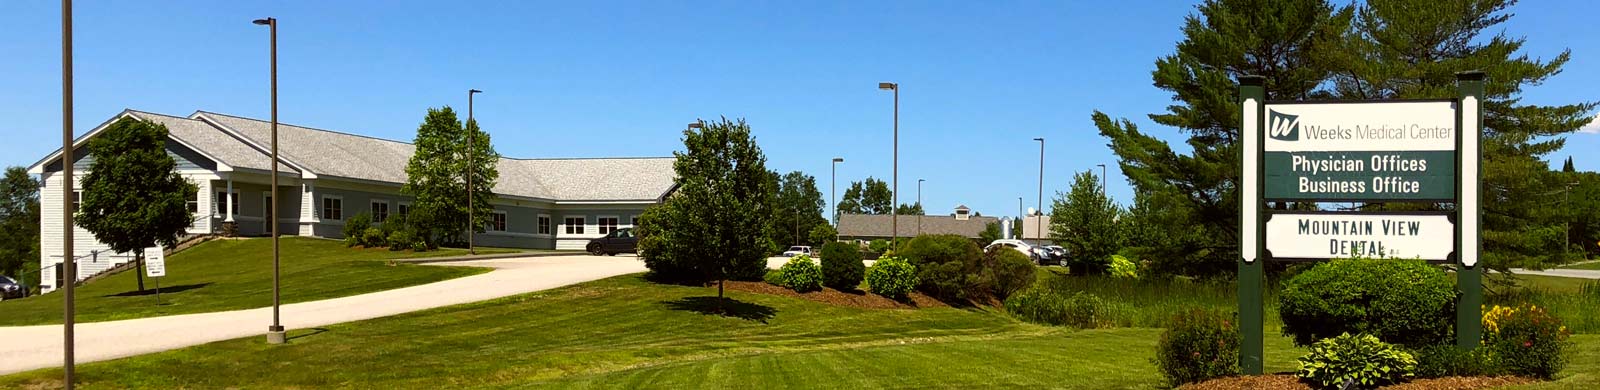 Mountain View Dental Offices in Whitefield, NH